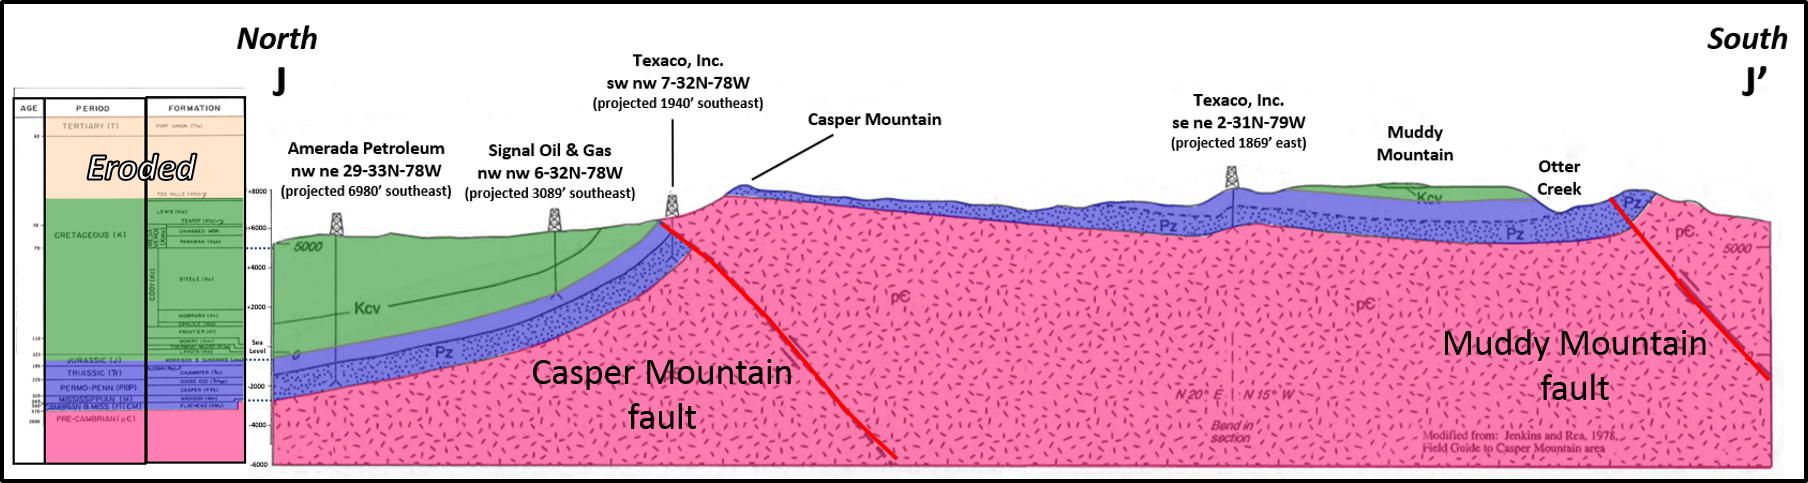 Geologic structural cross section across Casper Mountain, Wyoming